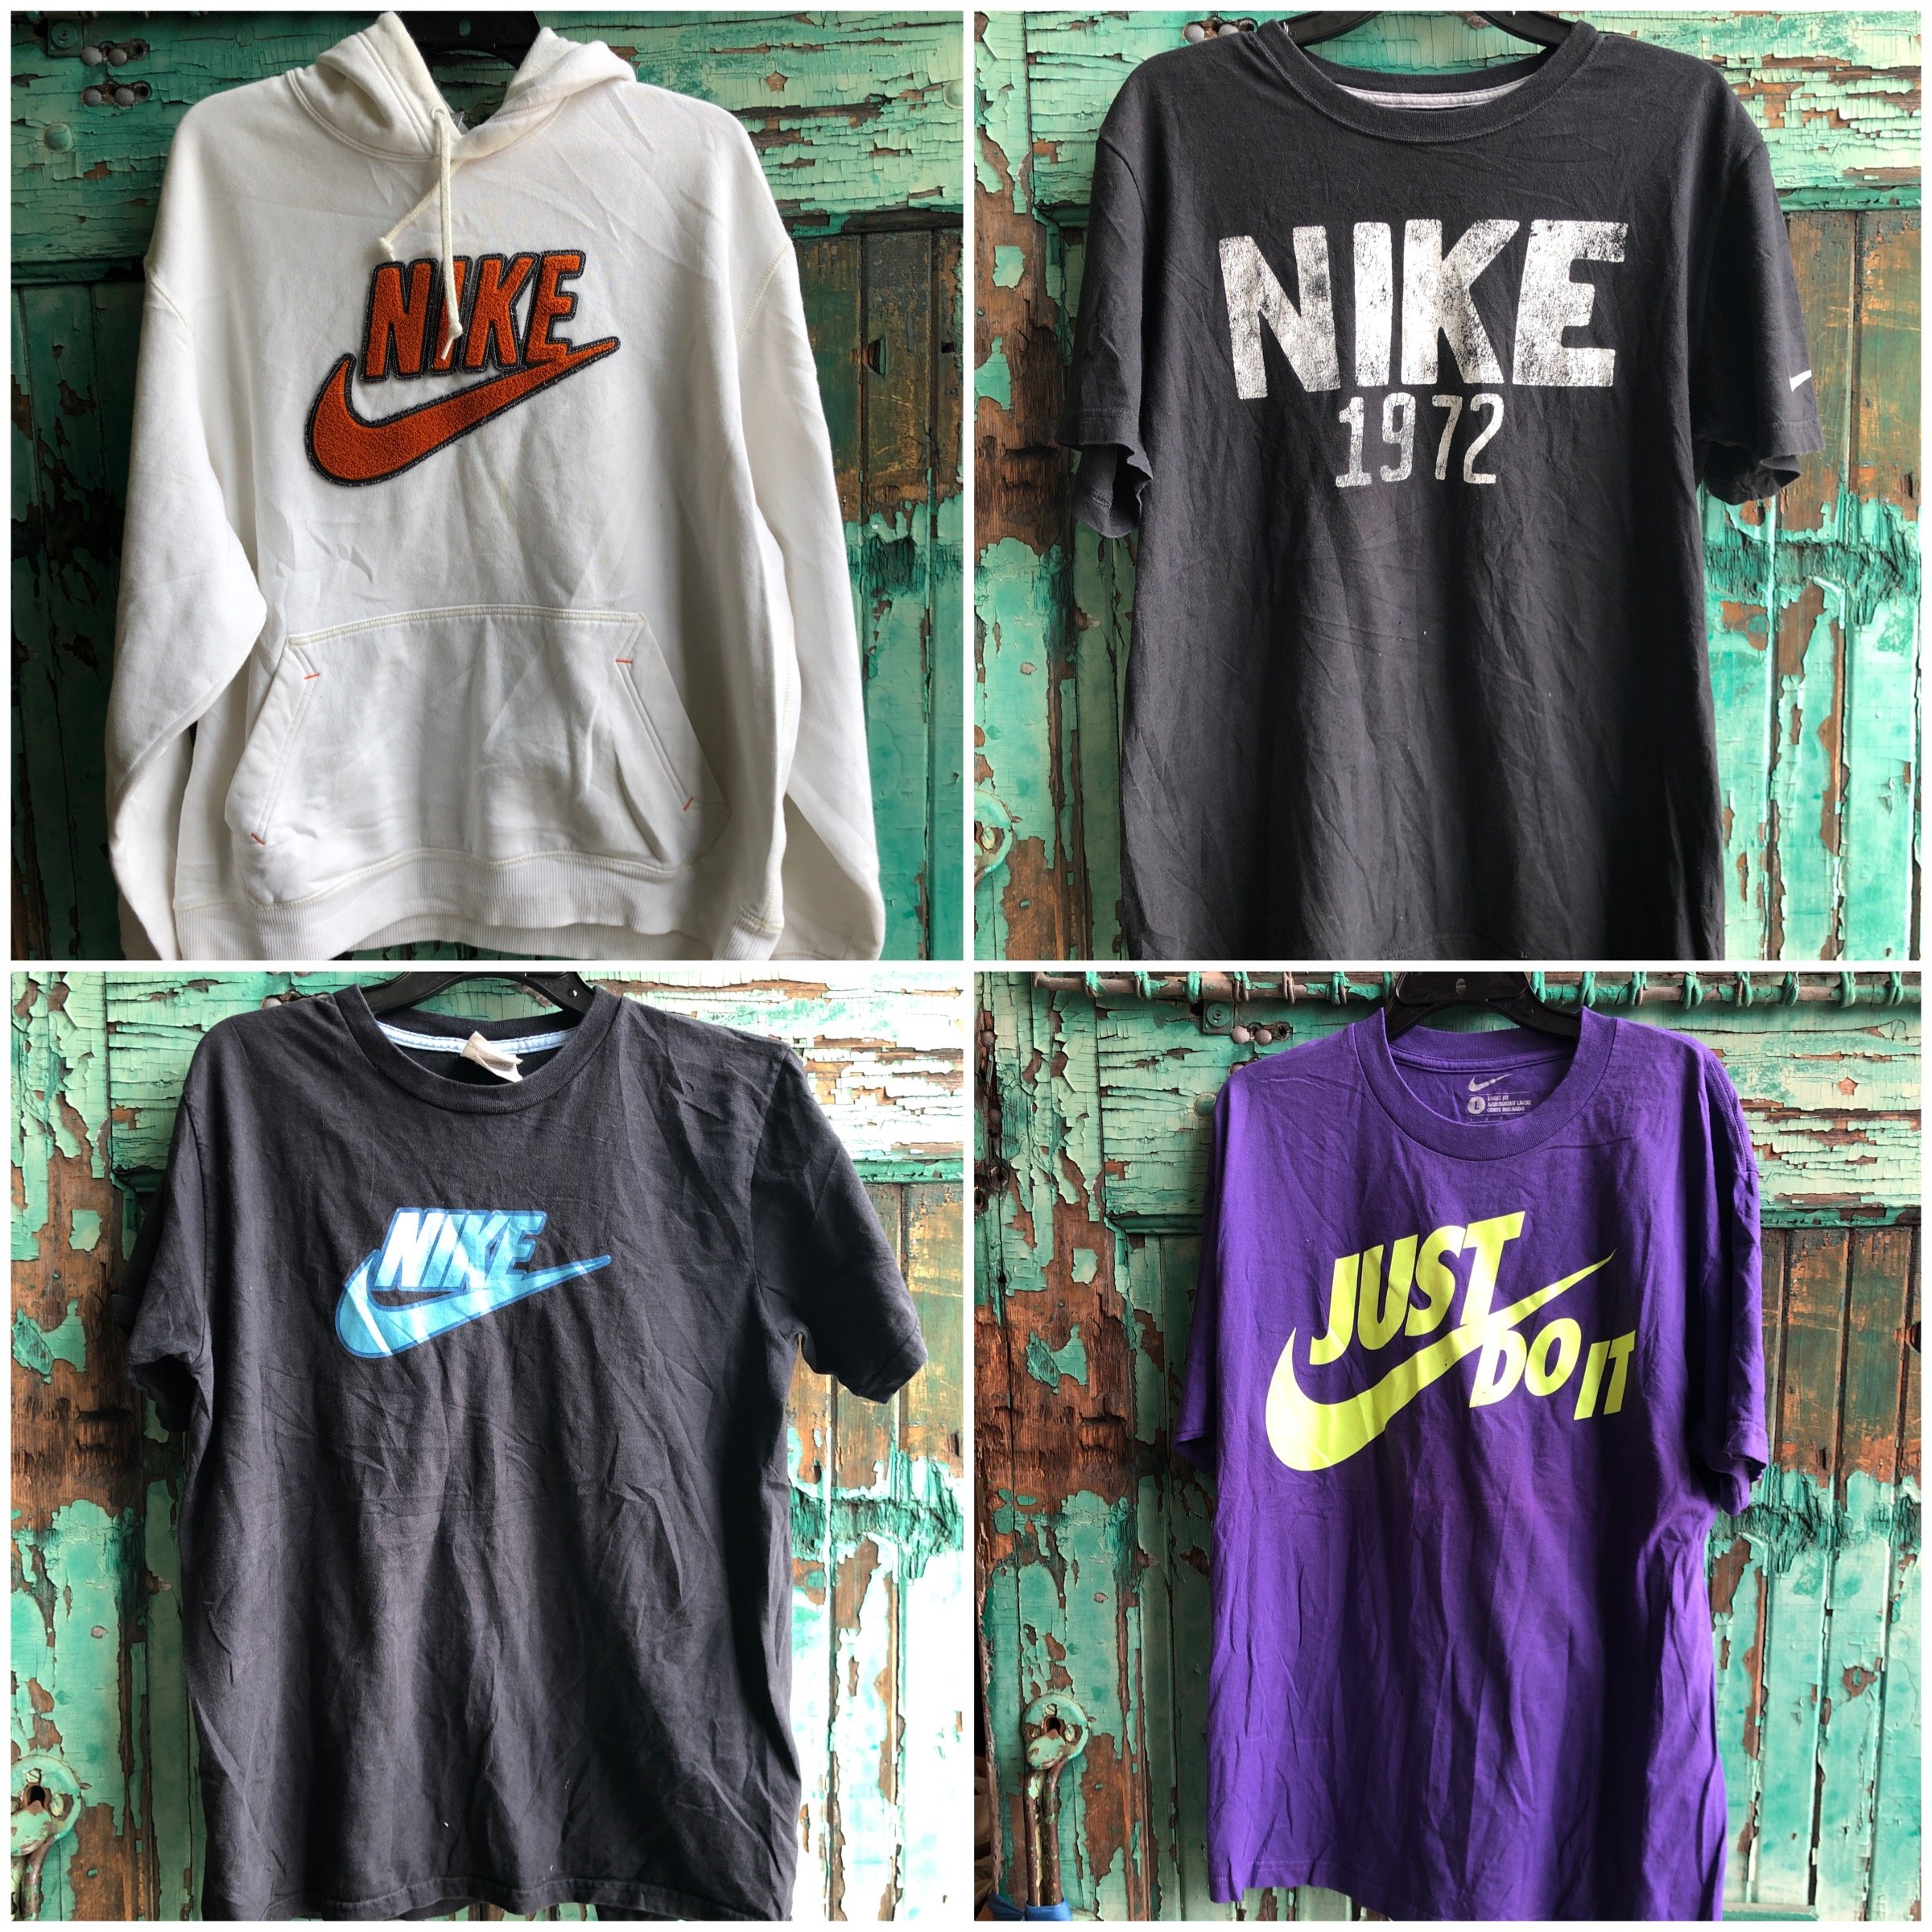 Nike Branded Clothing By The Pound Bulk Vintage Clothing